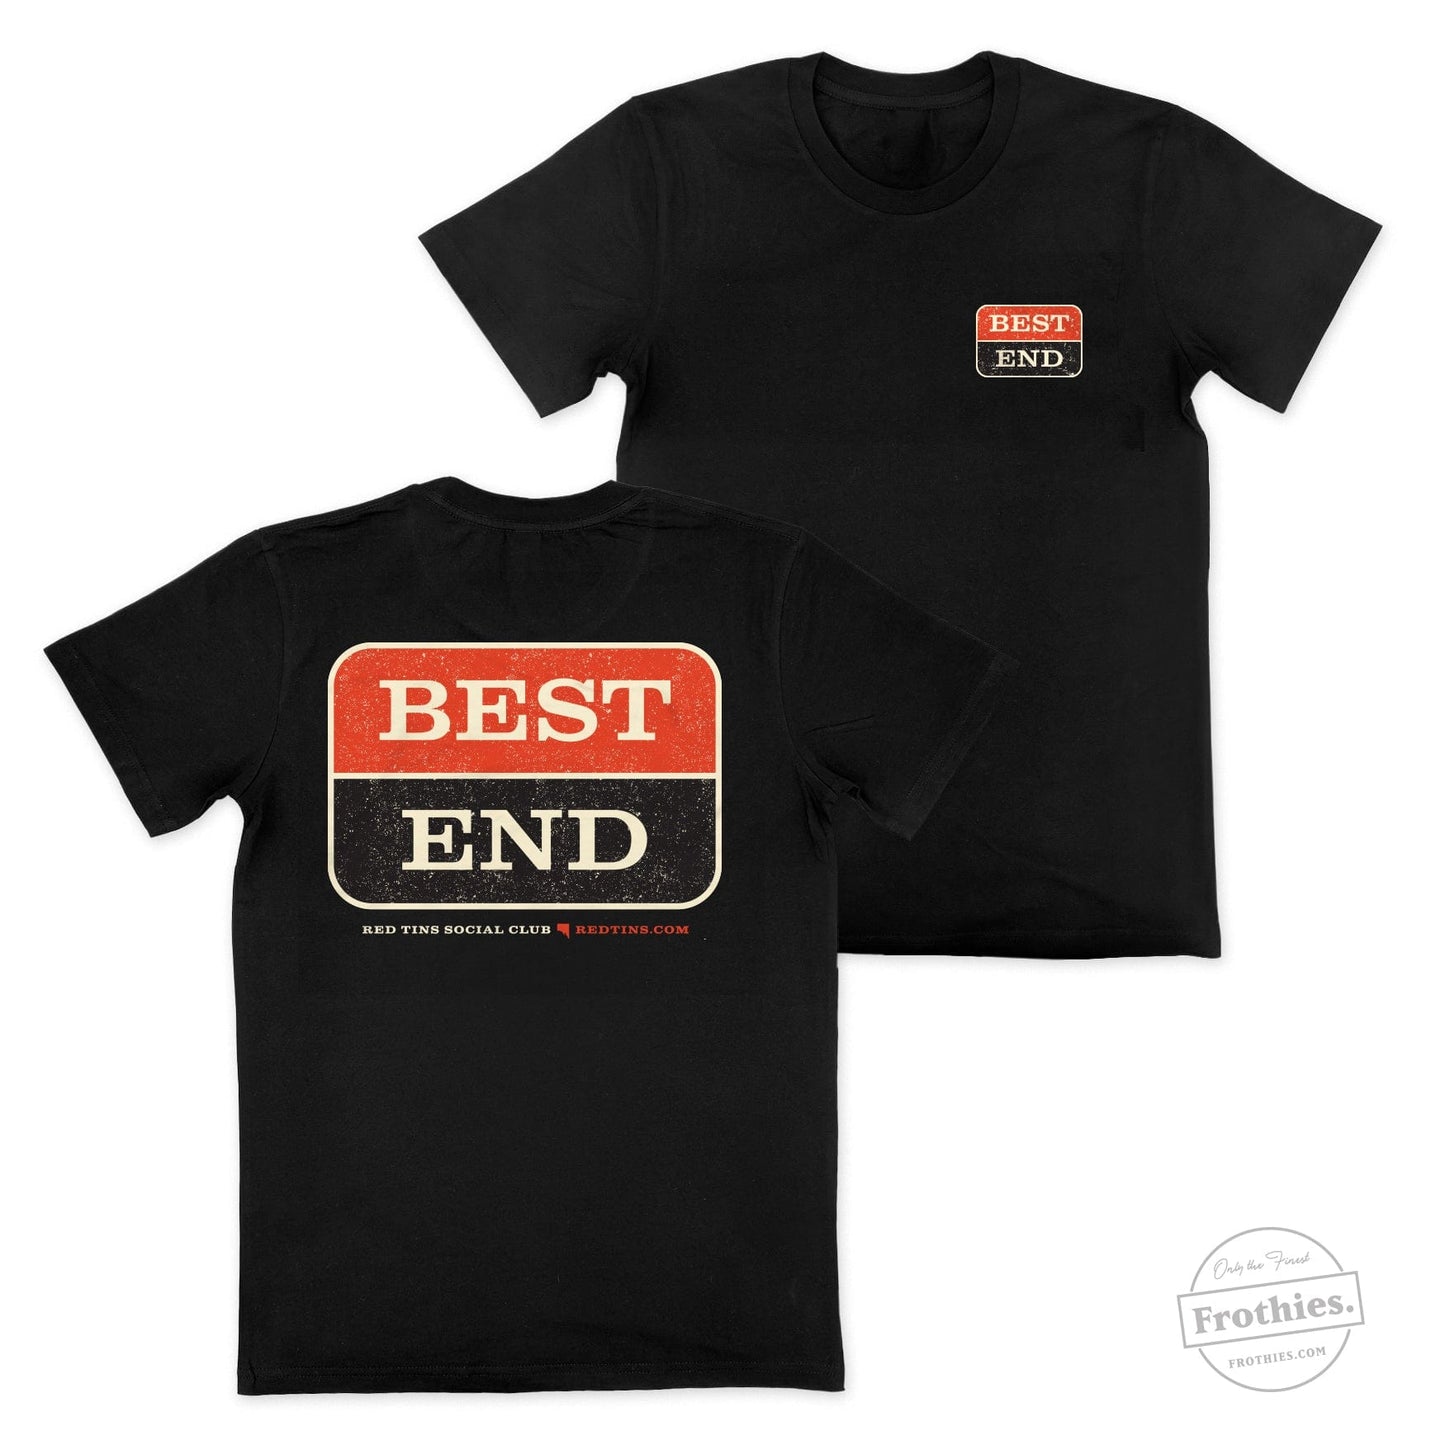 The Best End Vintage Tee T-Shirt Red Tins